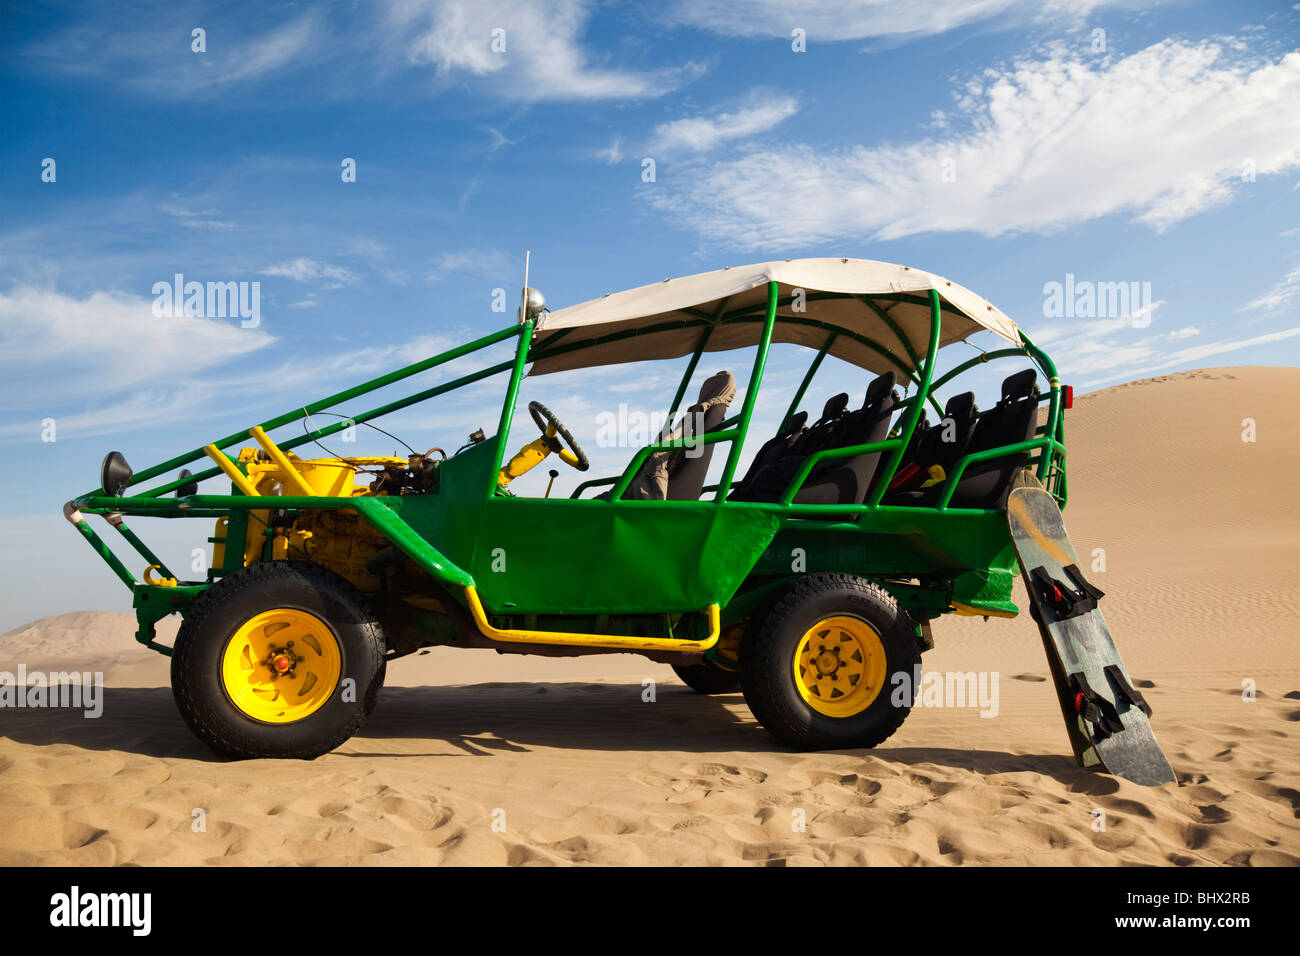 Dune buggy with boards for Sandboarding, Huacachina, Peru, South America Stock Photo